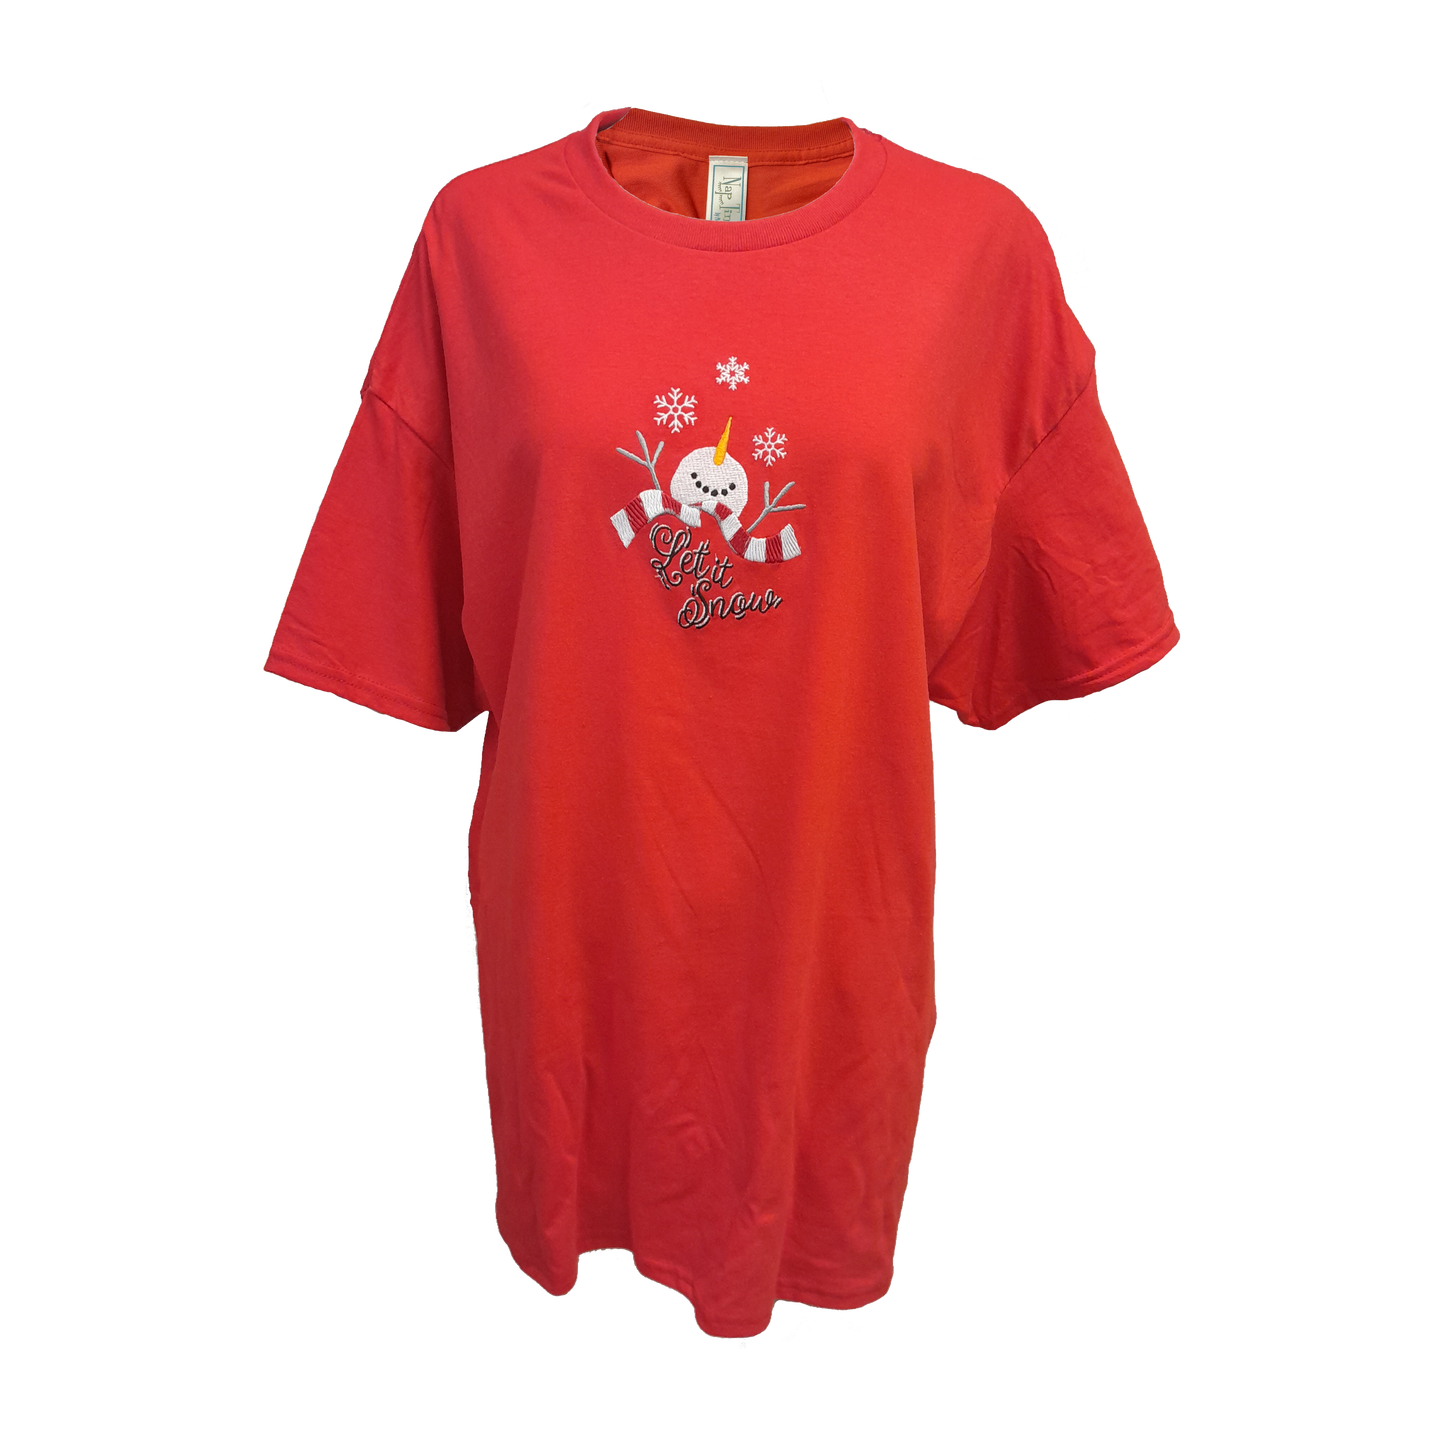 T249RDXXCT "Let It Snow" Women's Tee by Nap Time®